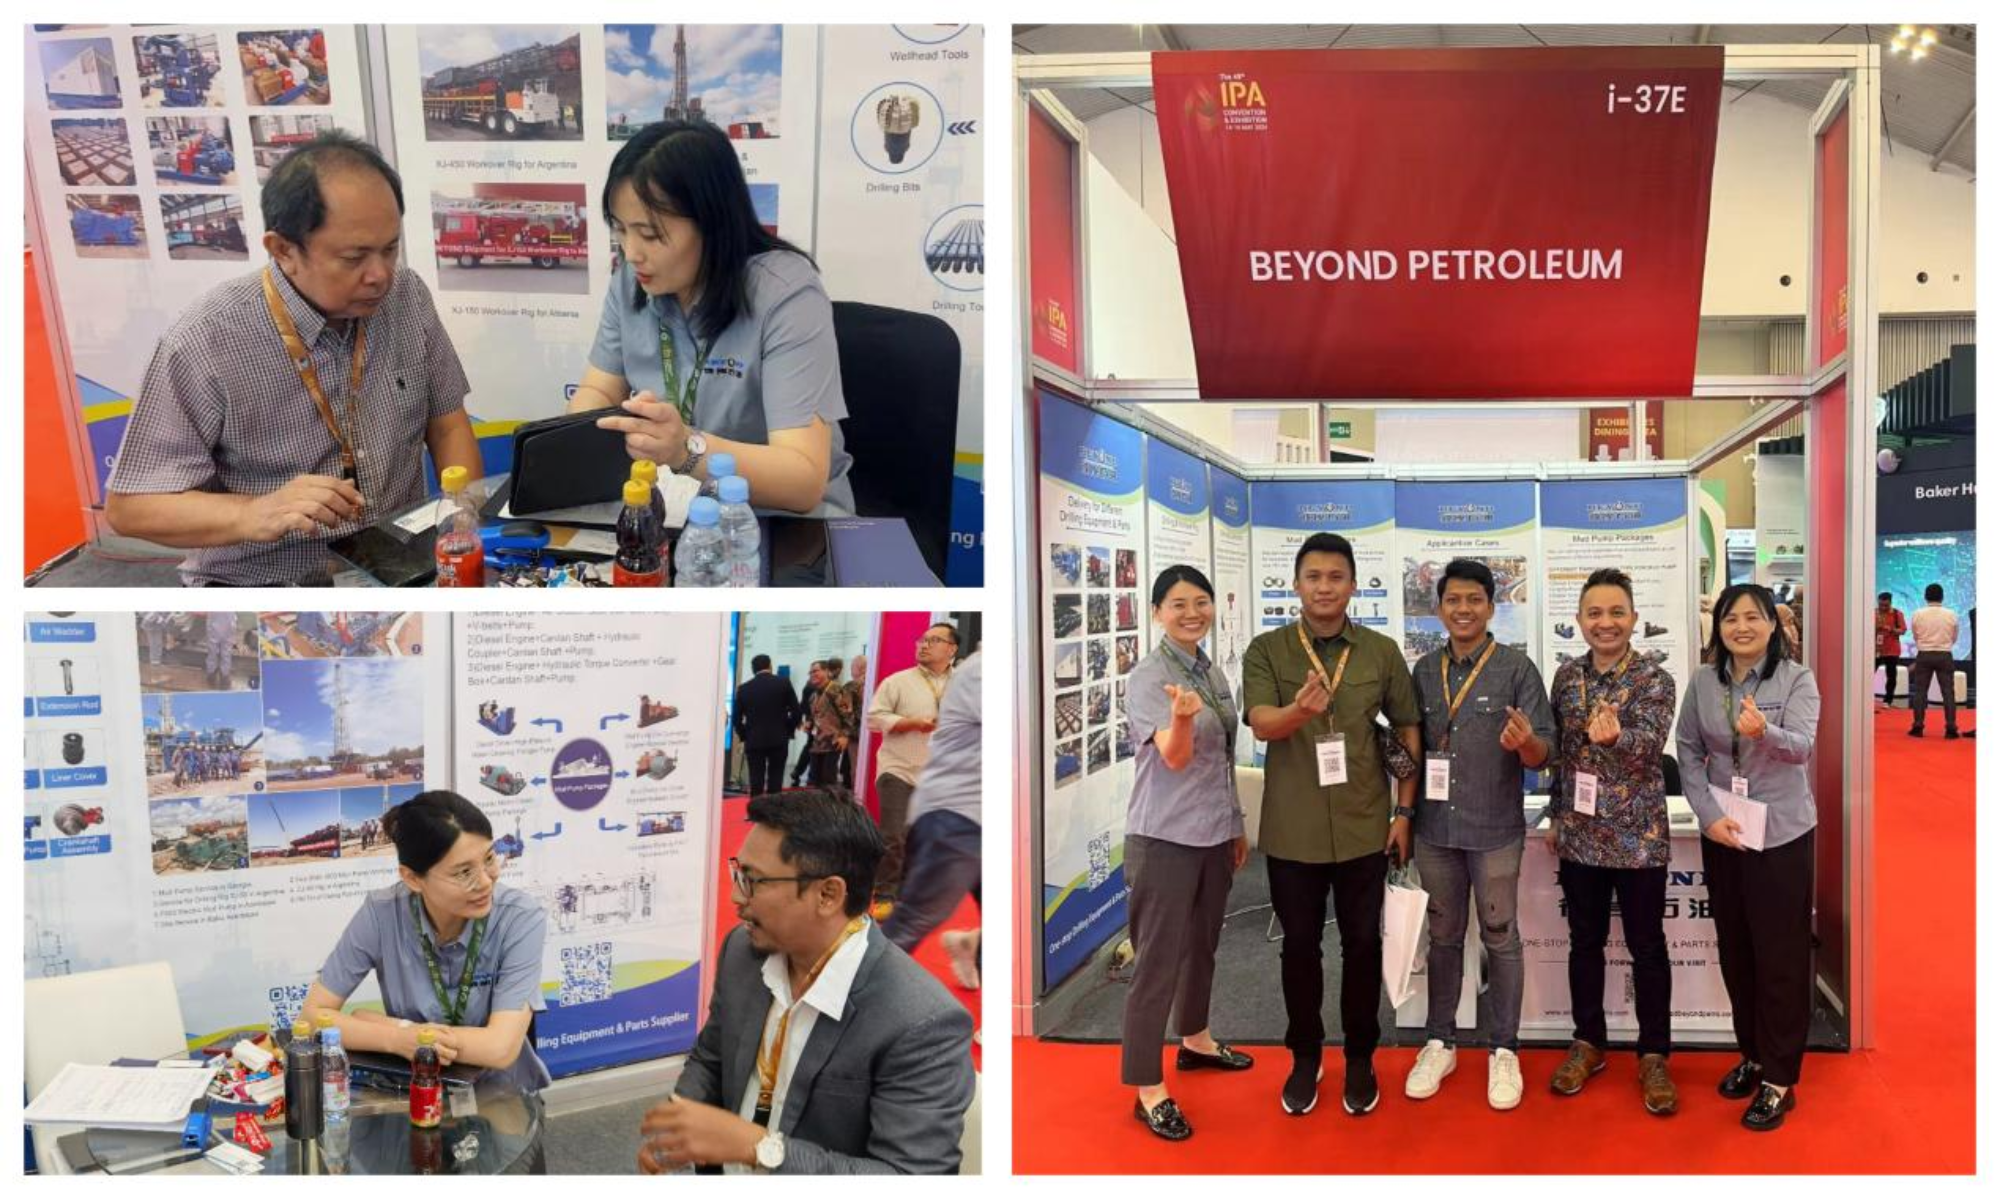 BEYOND petro participation at IPA exhibition in Indonesiav